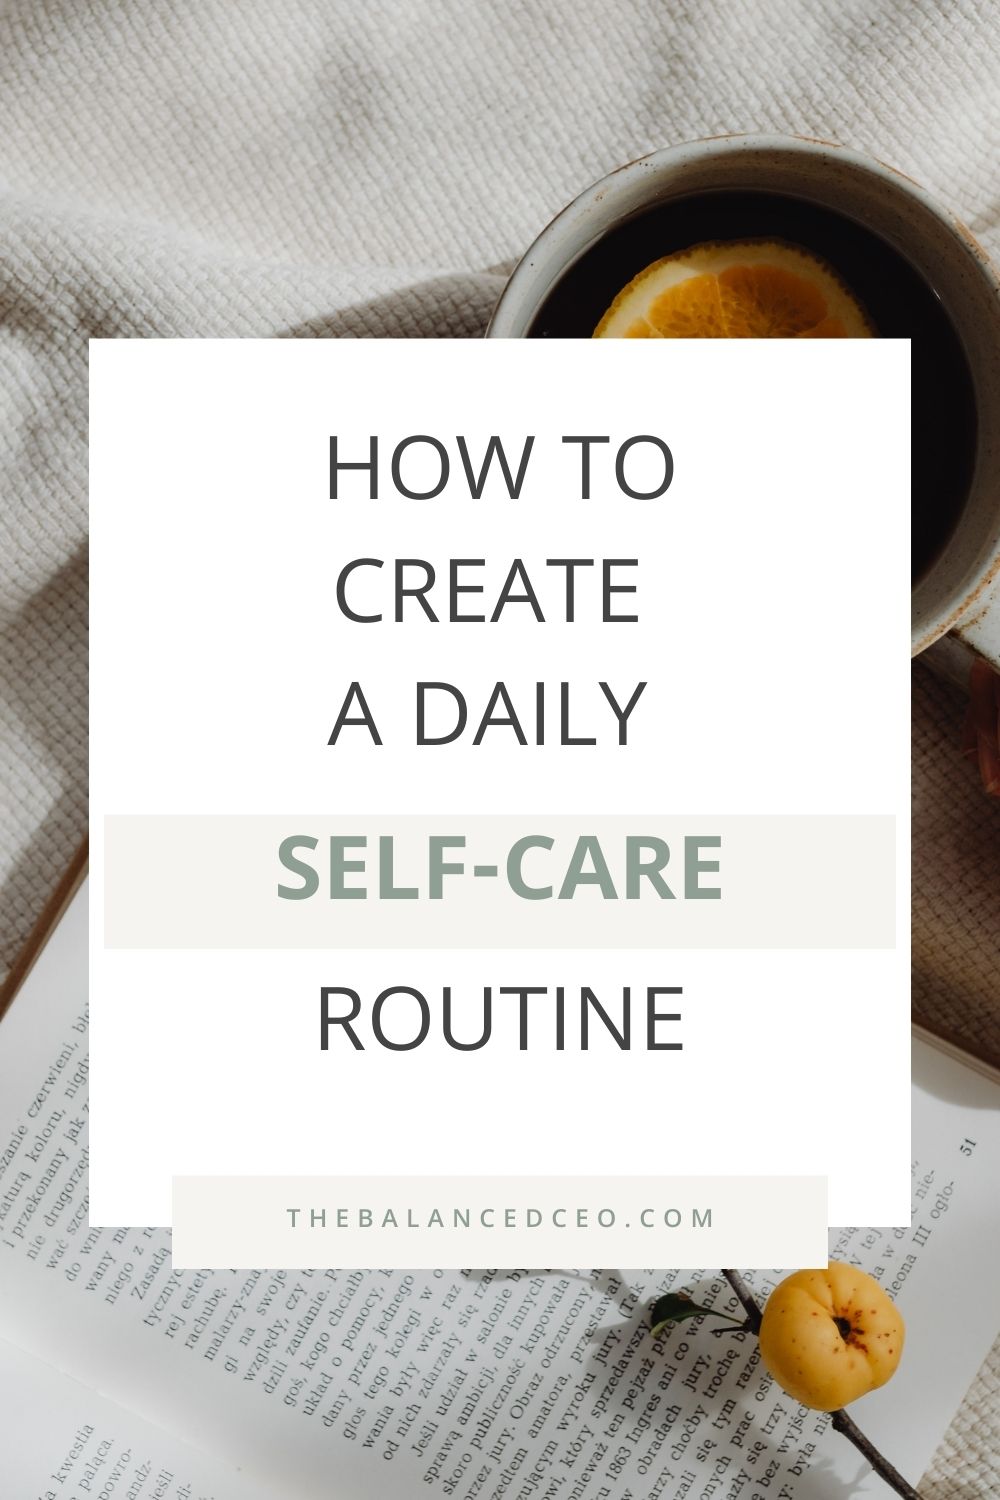 How to Create a Daily Self-Care Routine